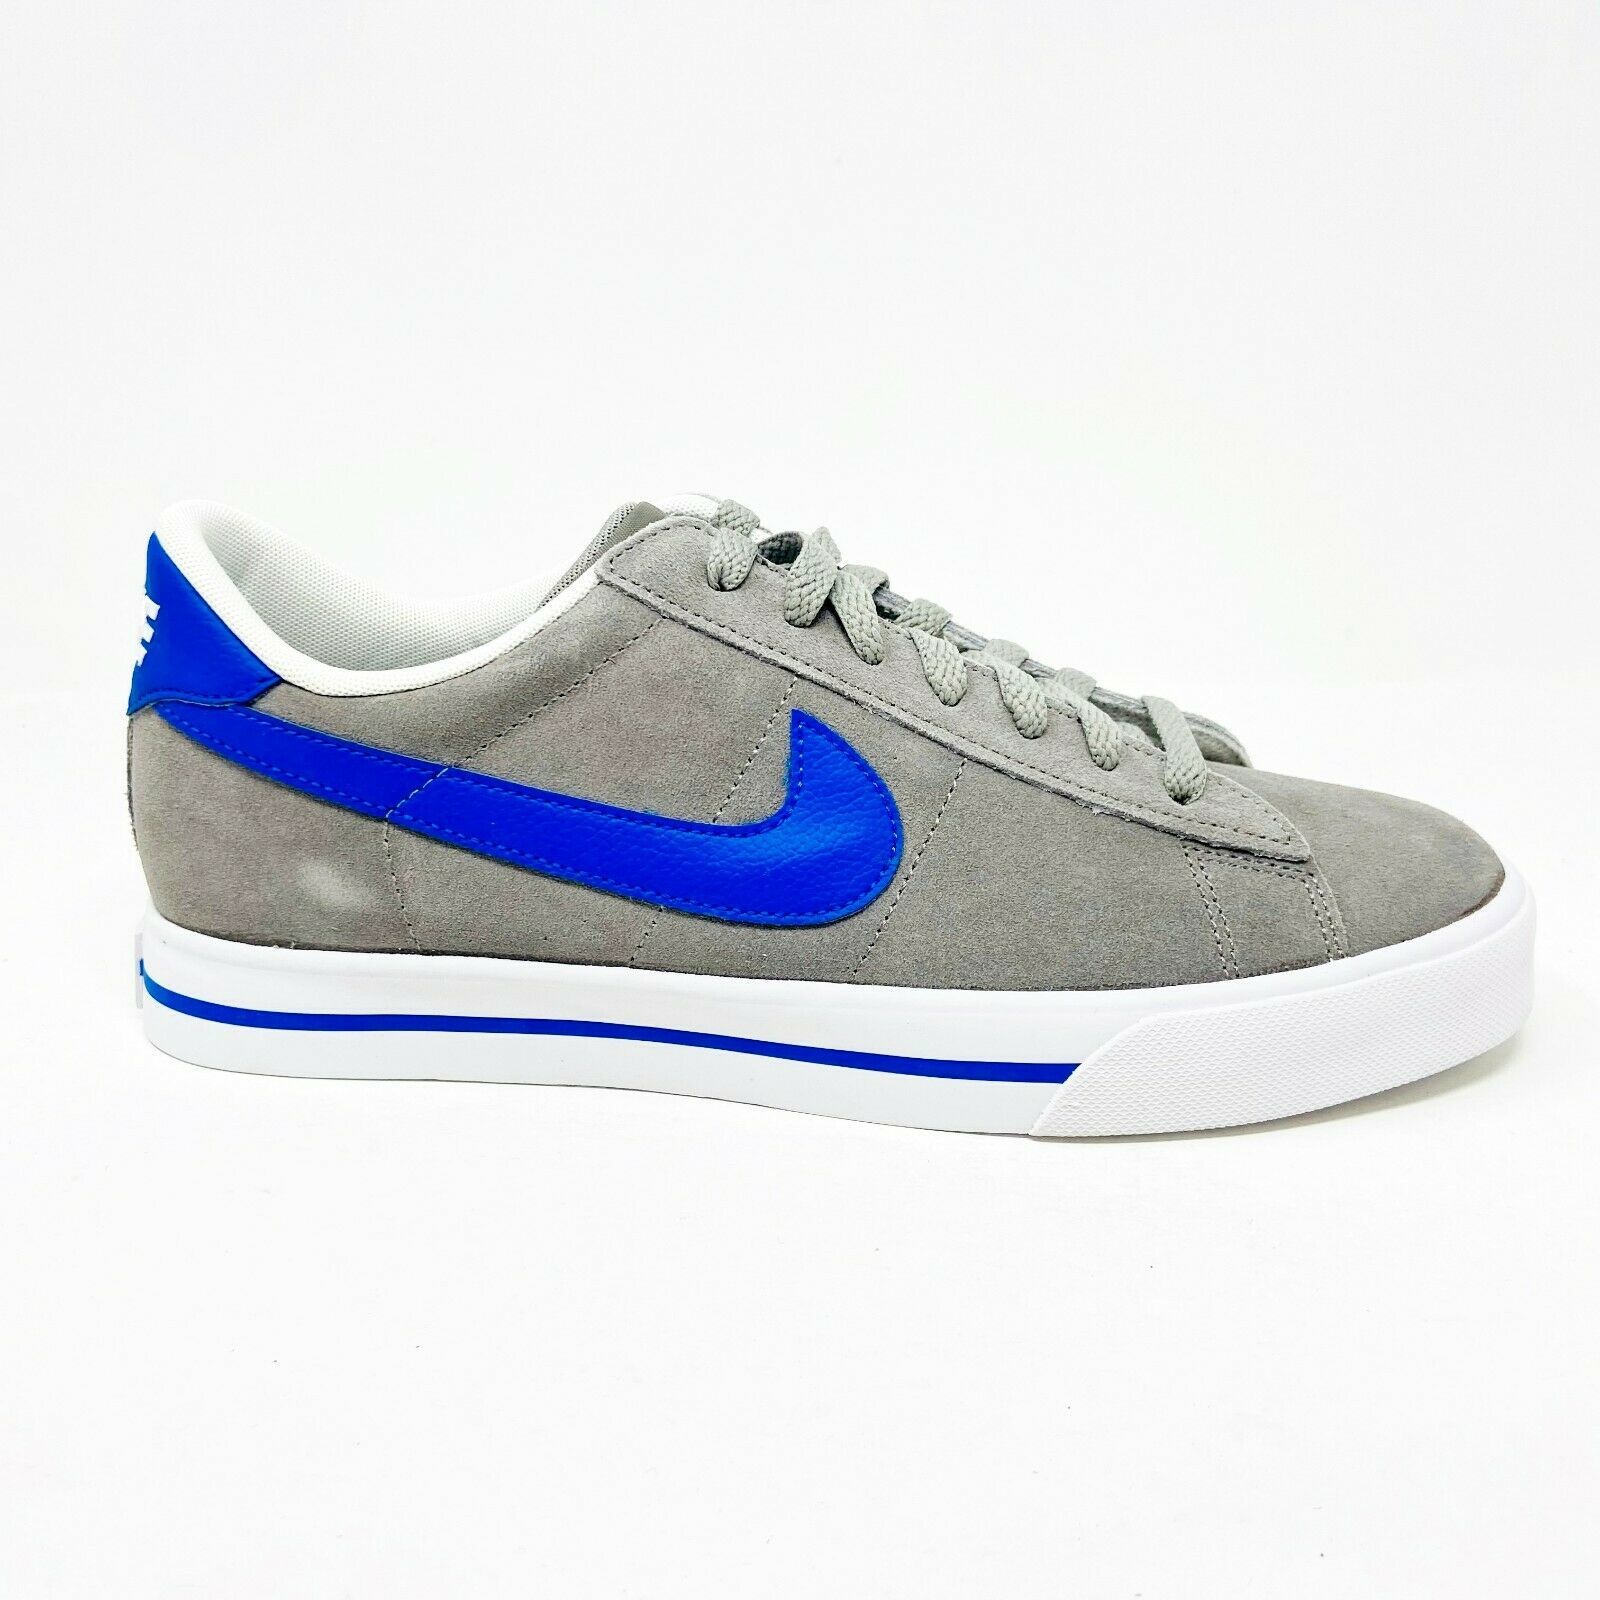 Nike Sweet Classic Leather Grey White Mens Sneakers 318333 044